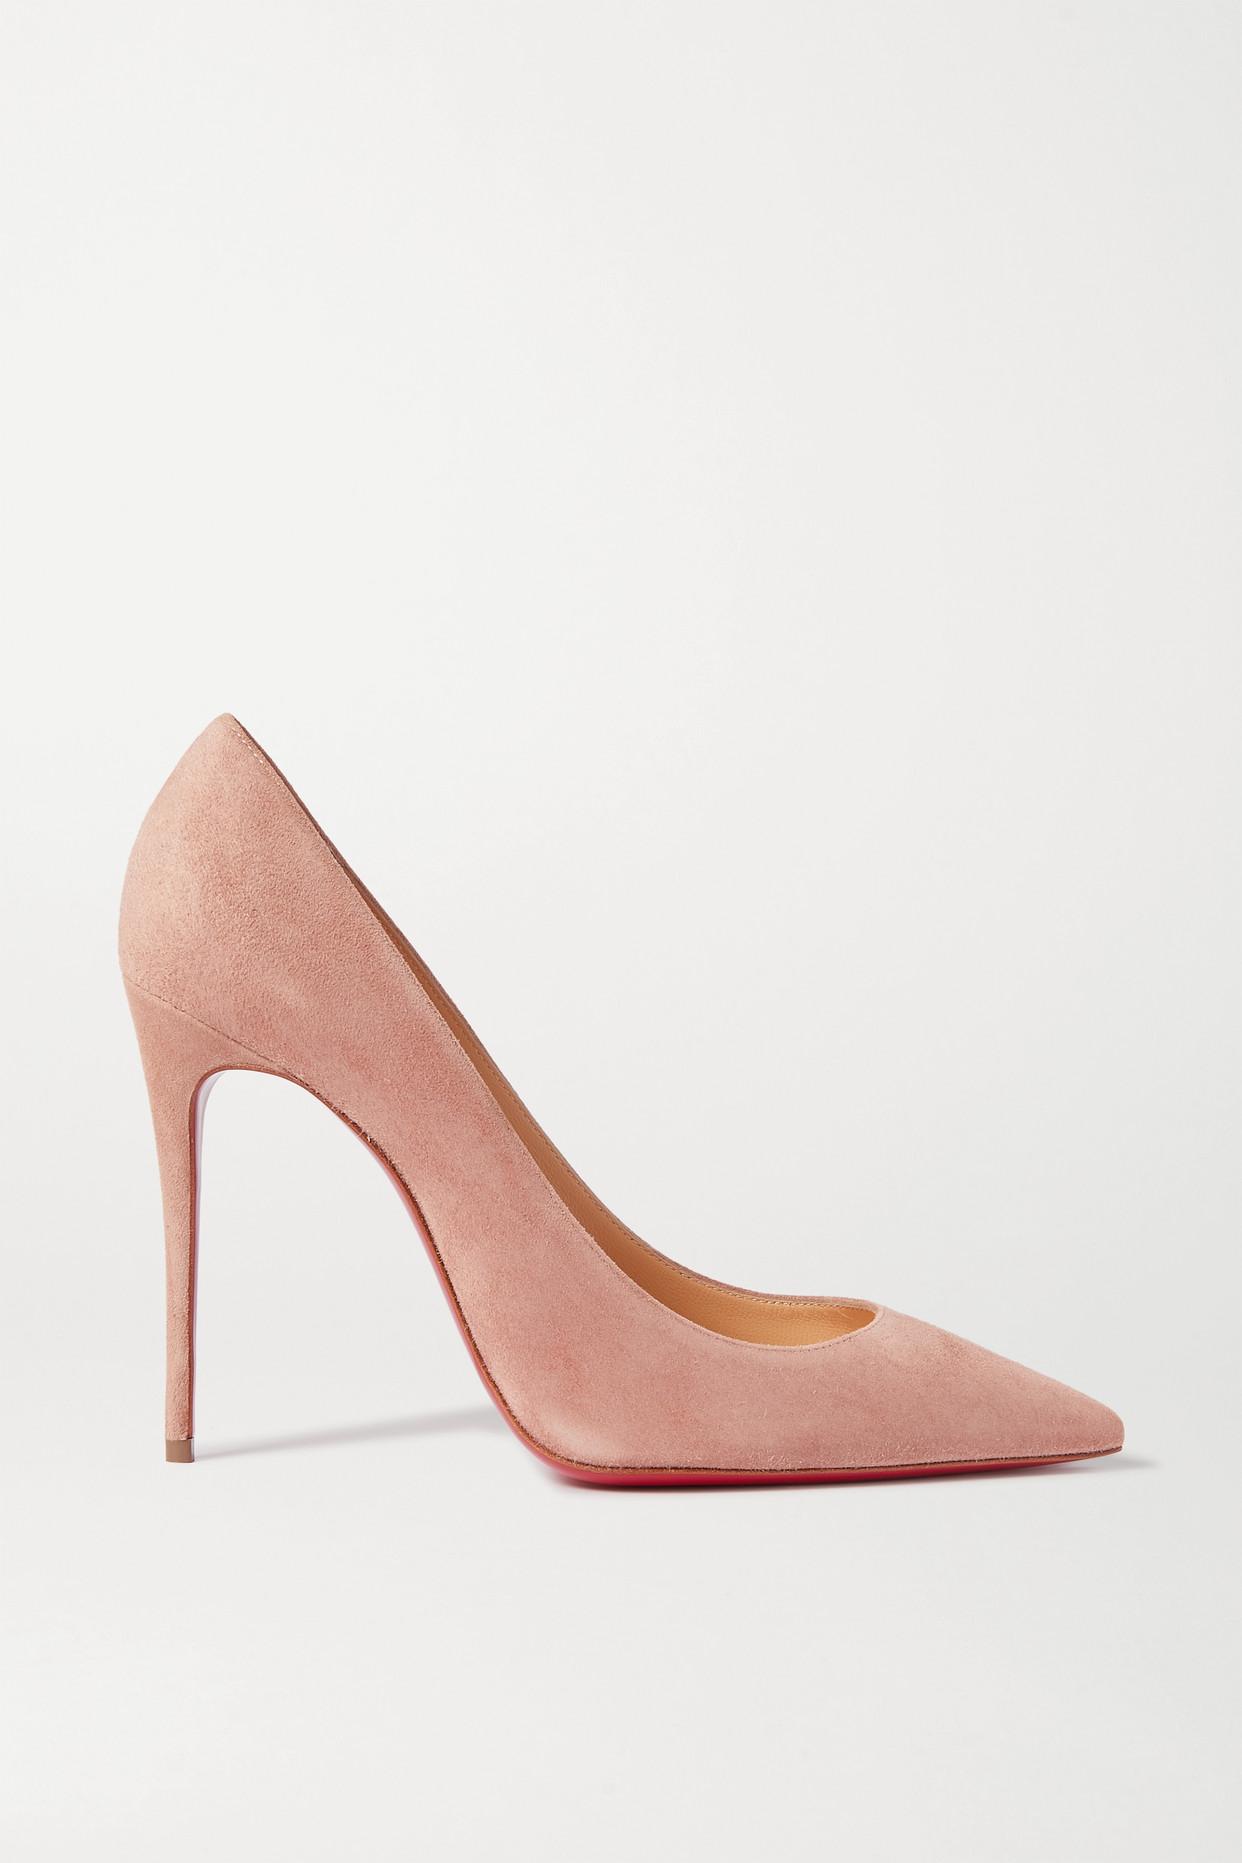 Christian Louboutin Kate 100 Suede Pumps | Lyst